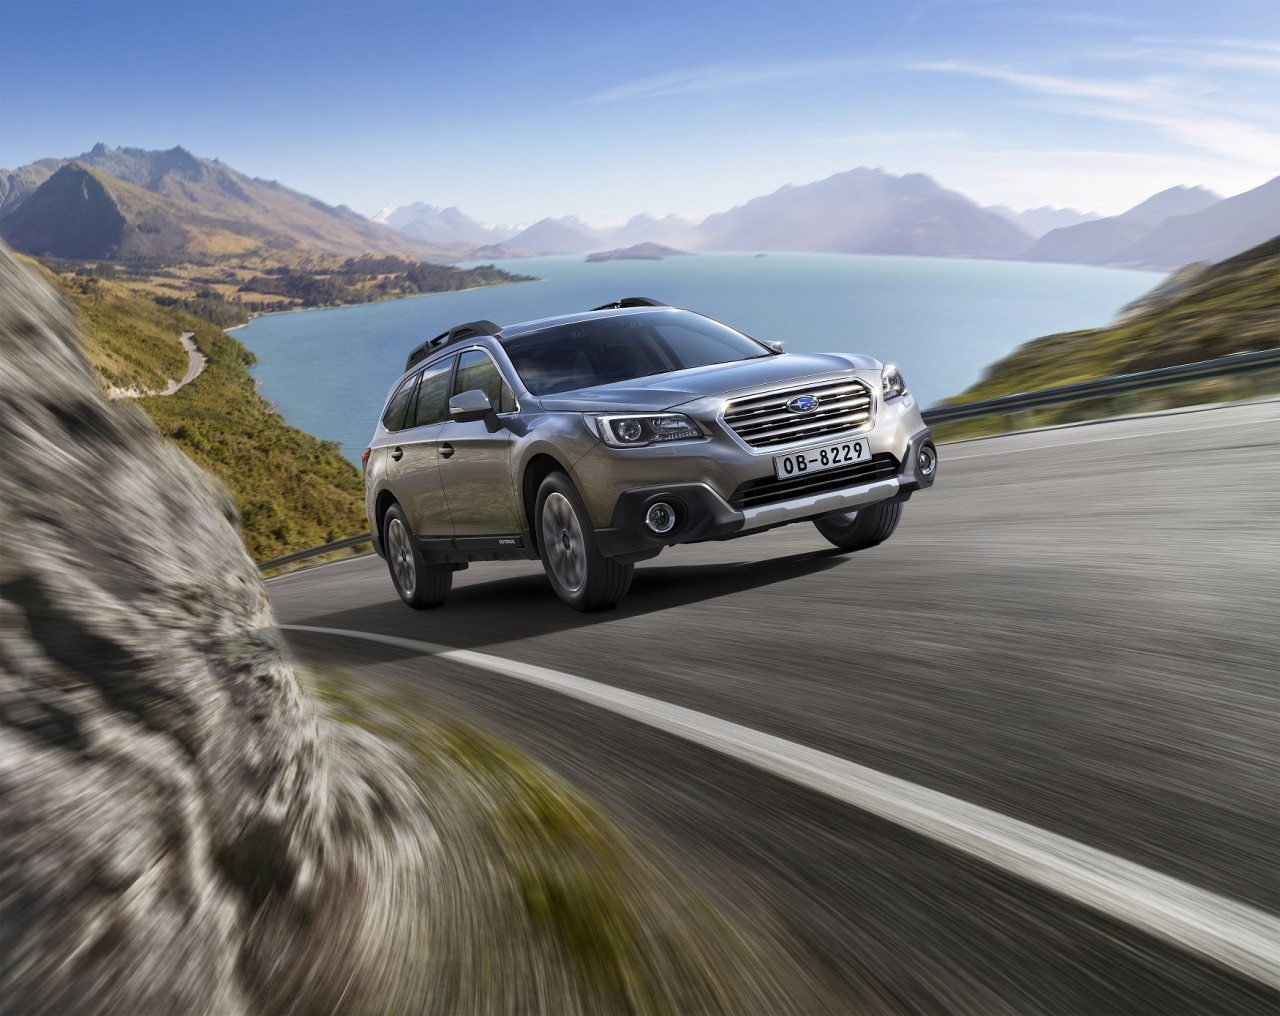 In 2017, Outback retained its status as the highest-selling Subaru model ever, with 1469 units sold – up 16% on 2016 and accounting for 44% of total Subaru sales. 